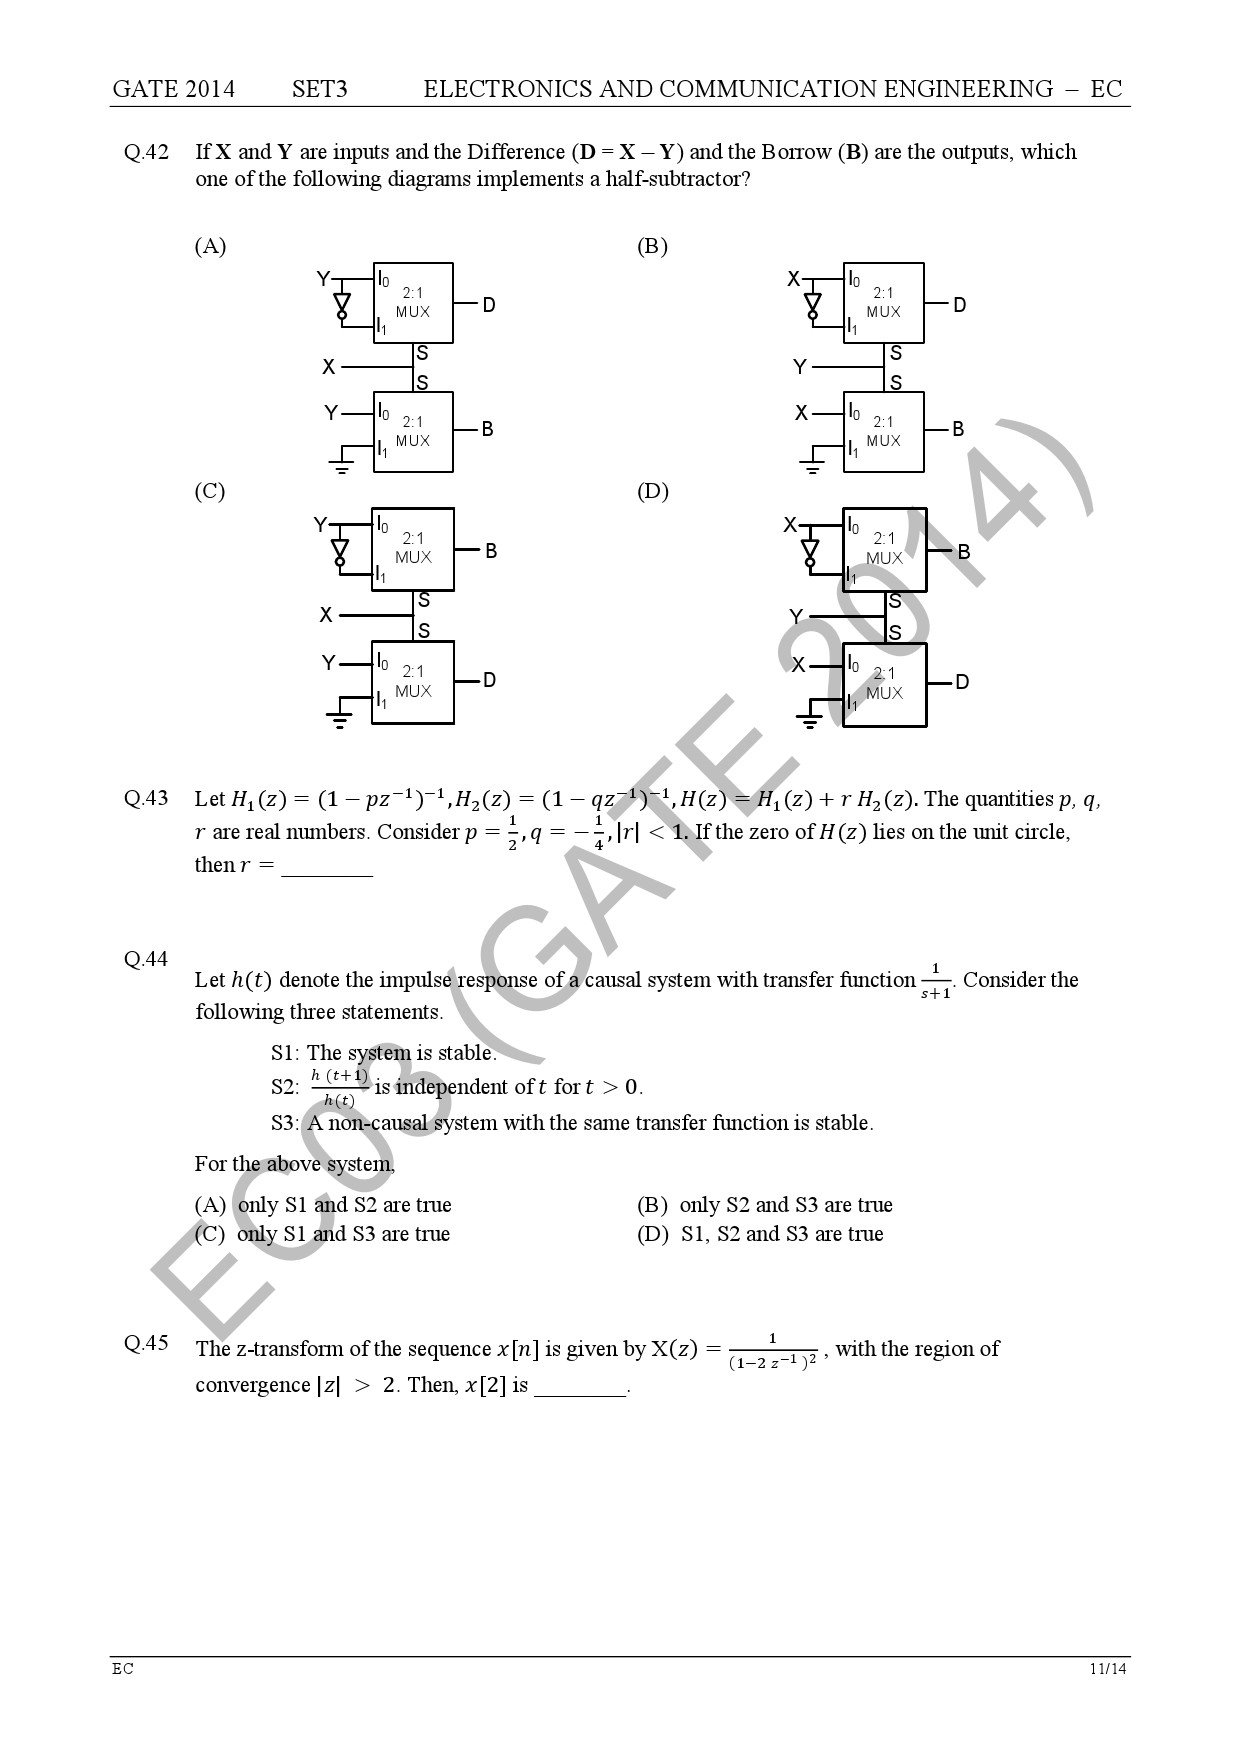 GATE Exam Question Paper 2014 Electronics and Communication Engineering Set 3 18